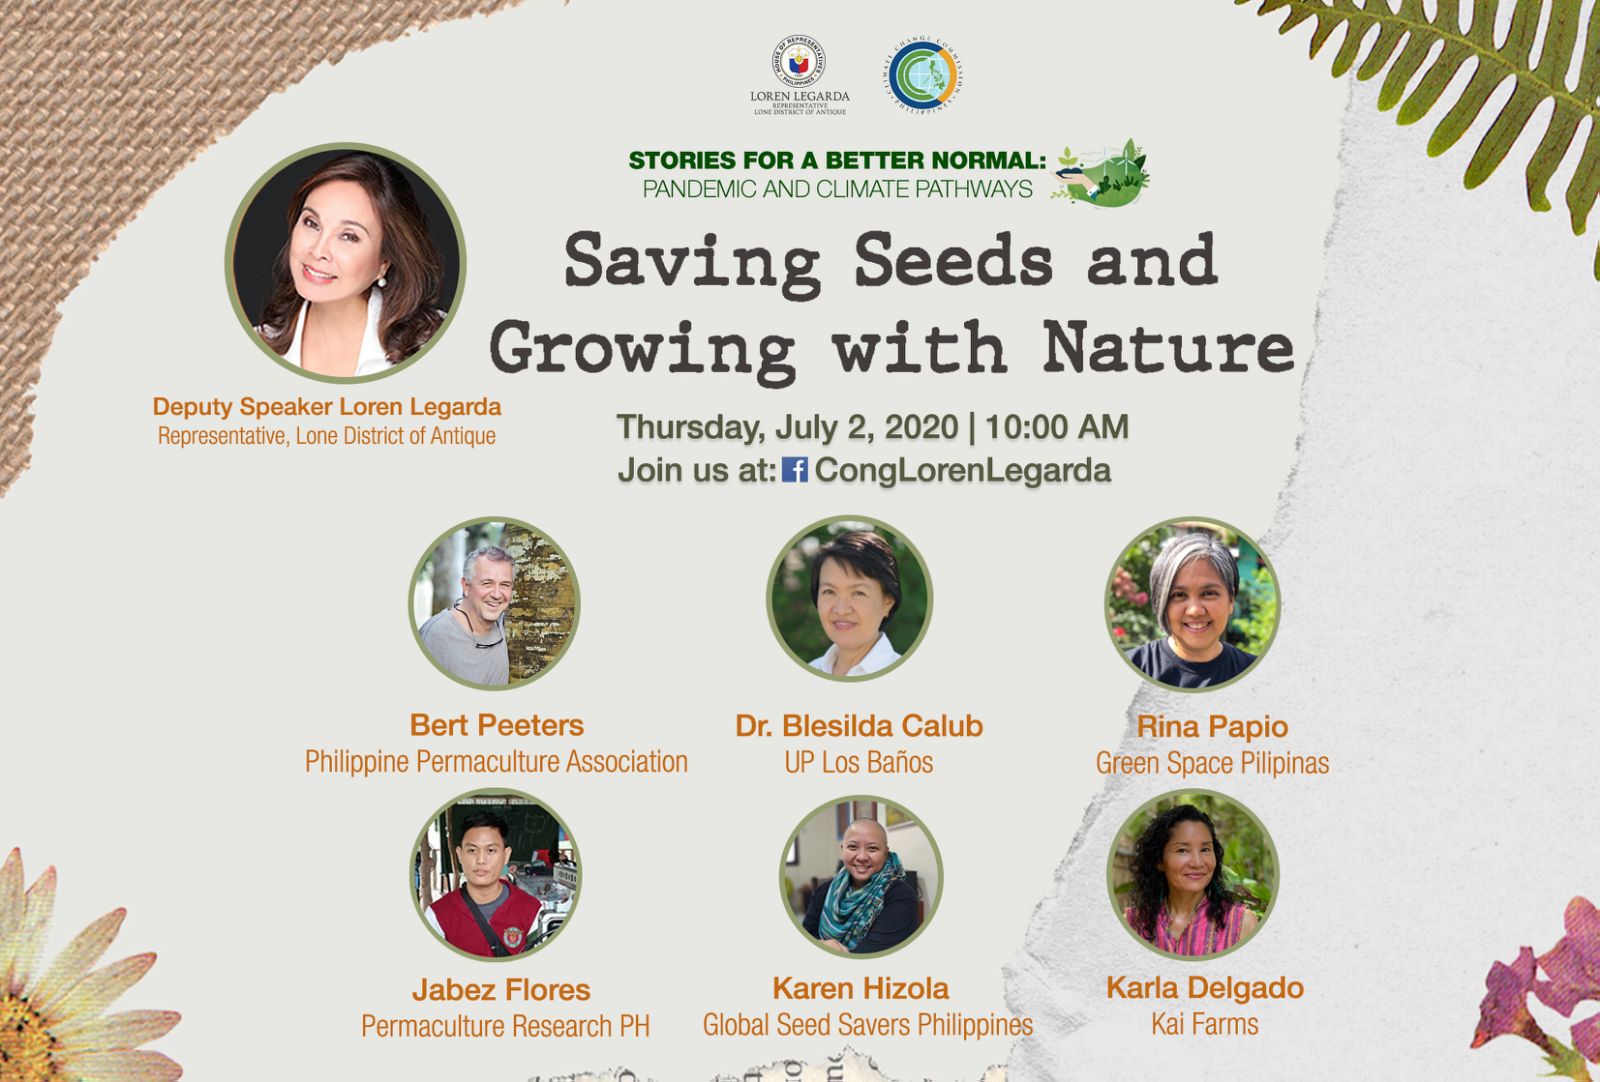 Saving Seeds and Growing with Nature on 7th Episode of “Stories for a Better Normal” Series